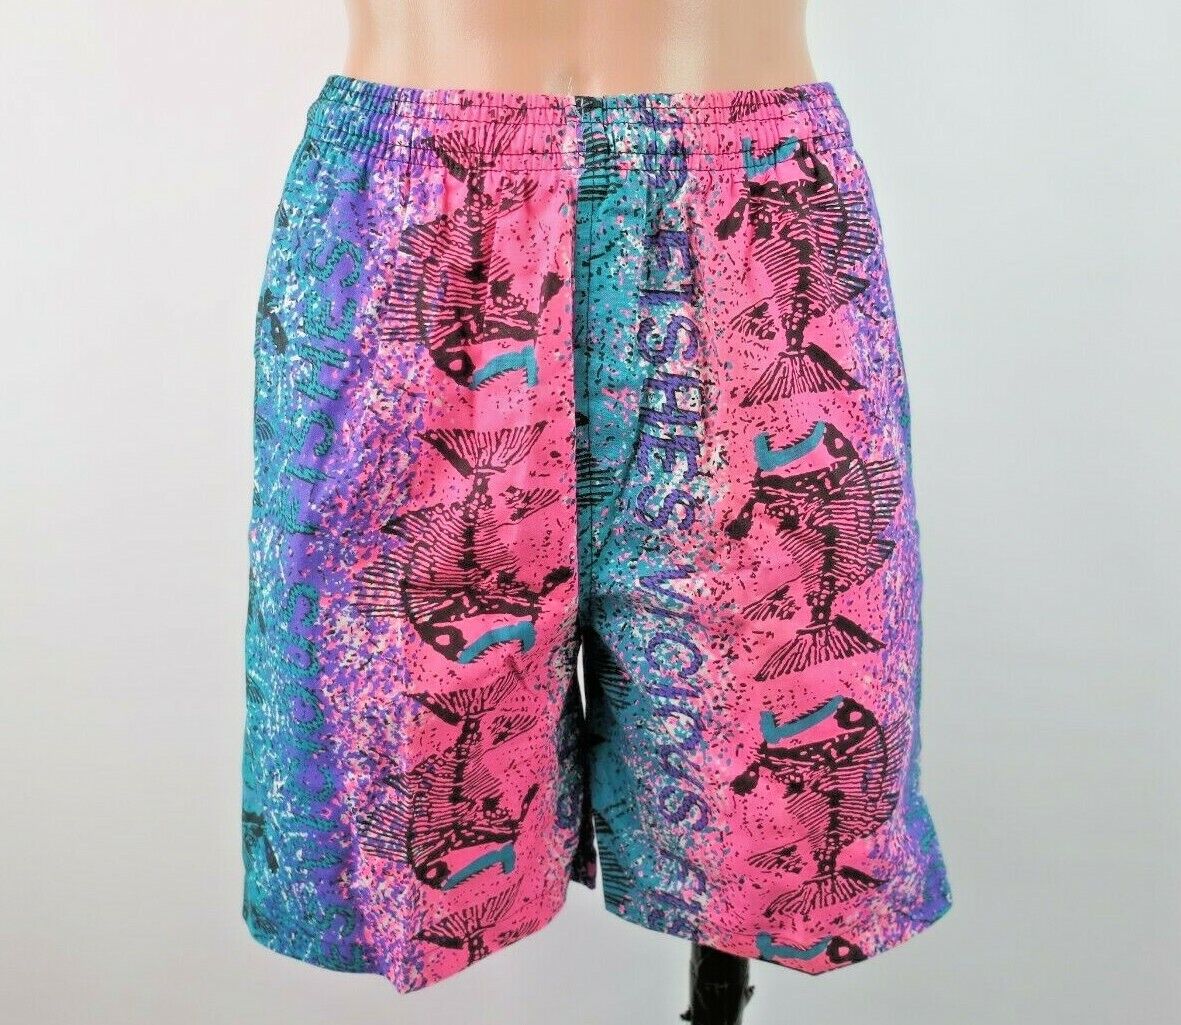 Vtg 80s Vicious Fishes Swim Trunks Shorts Neon All Over Print Fossil 6x-7 Nwot